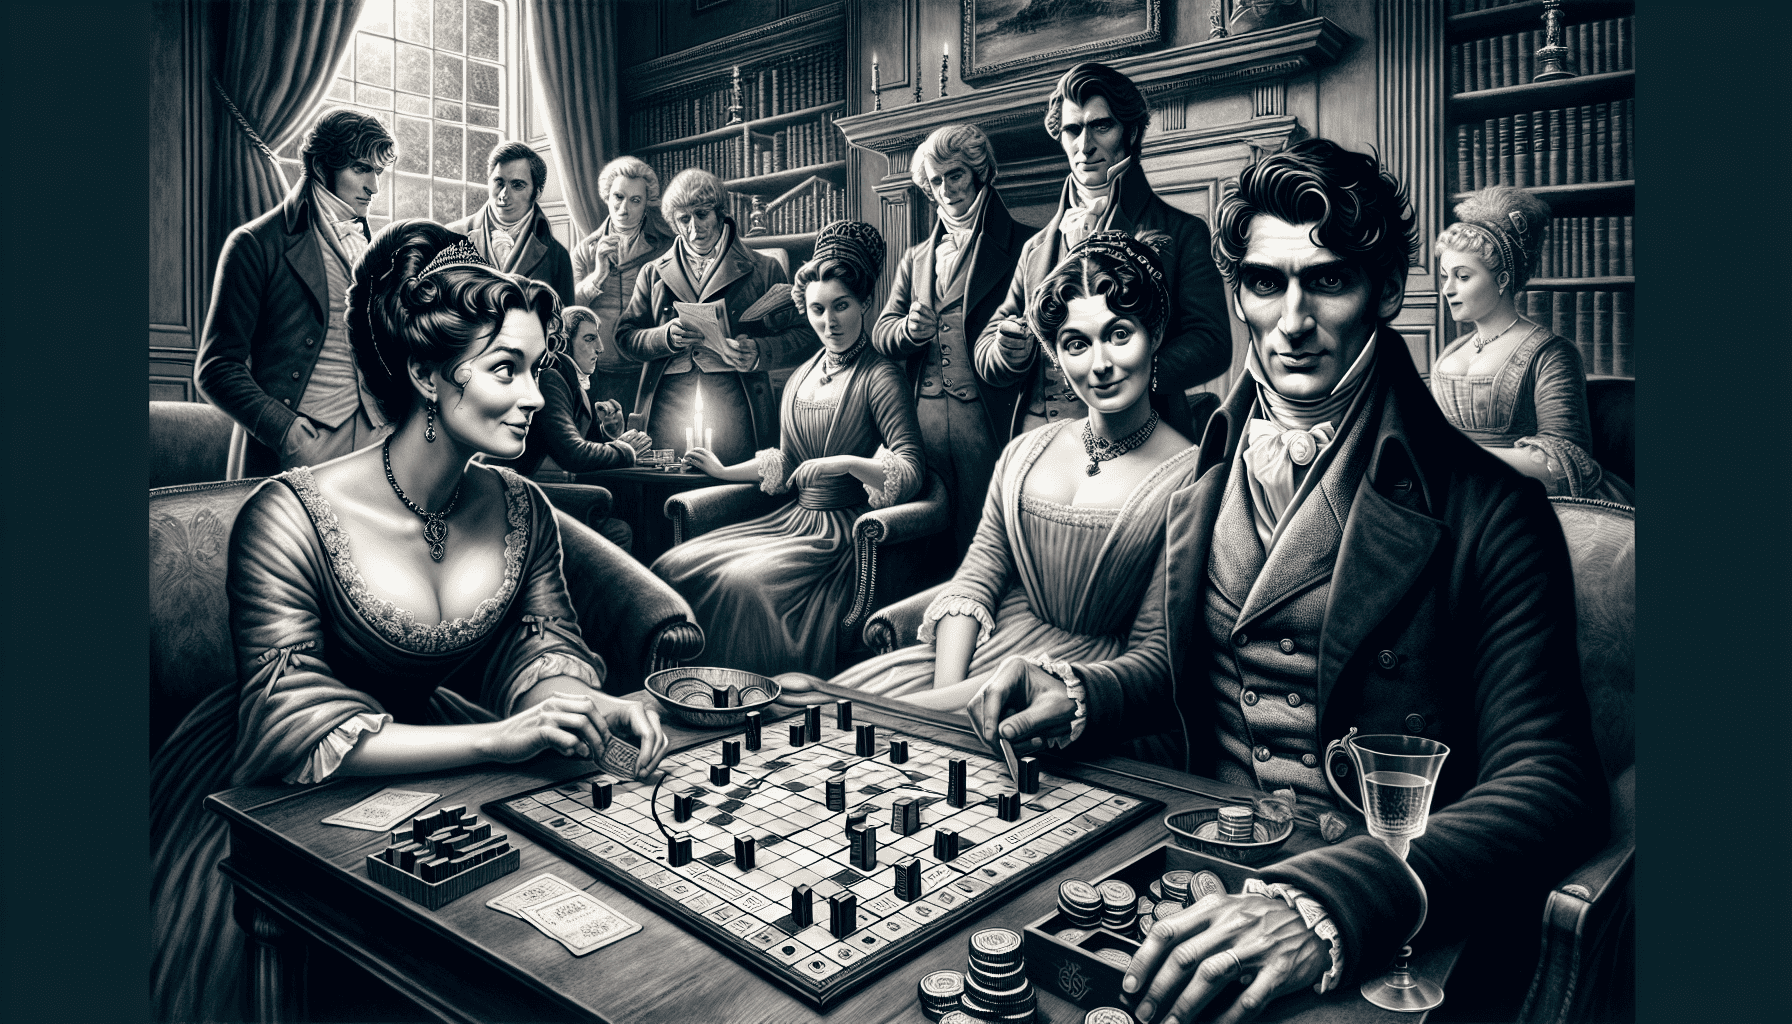 characters from Pride and Prejudice navigating the board game made for book lover games